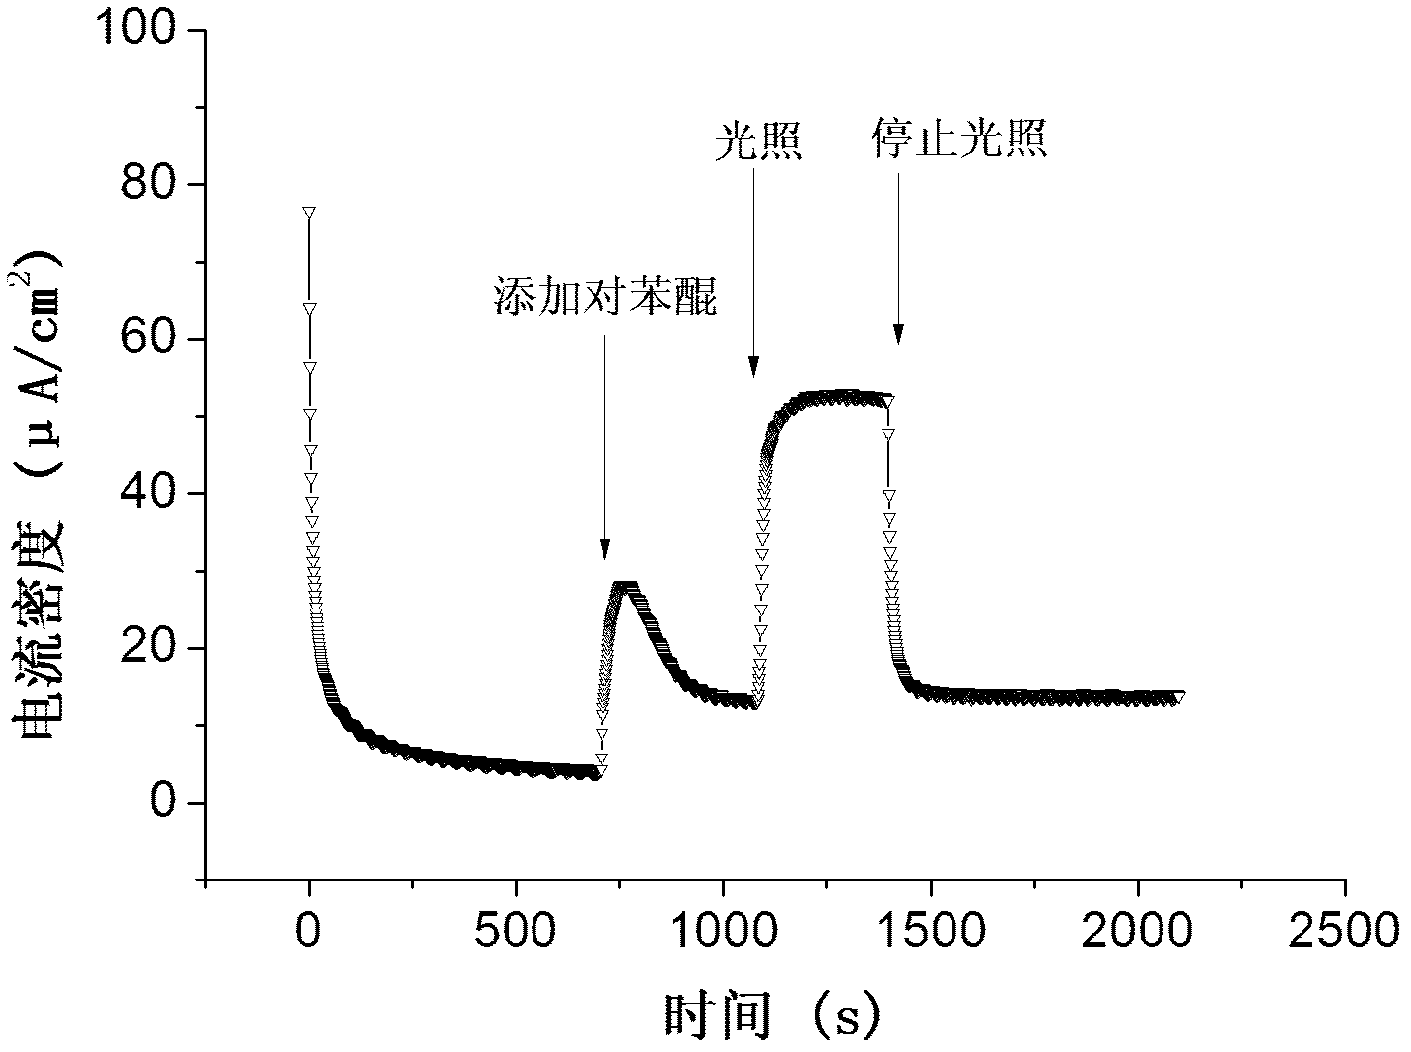 Method for producing hydrogen by visible light-driven microalgae electrolytic cell-based decomposition of water